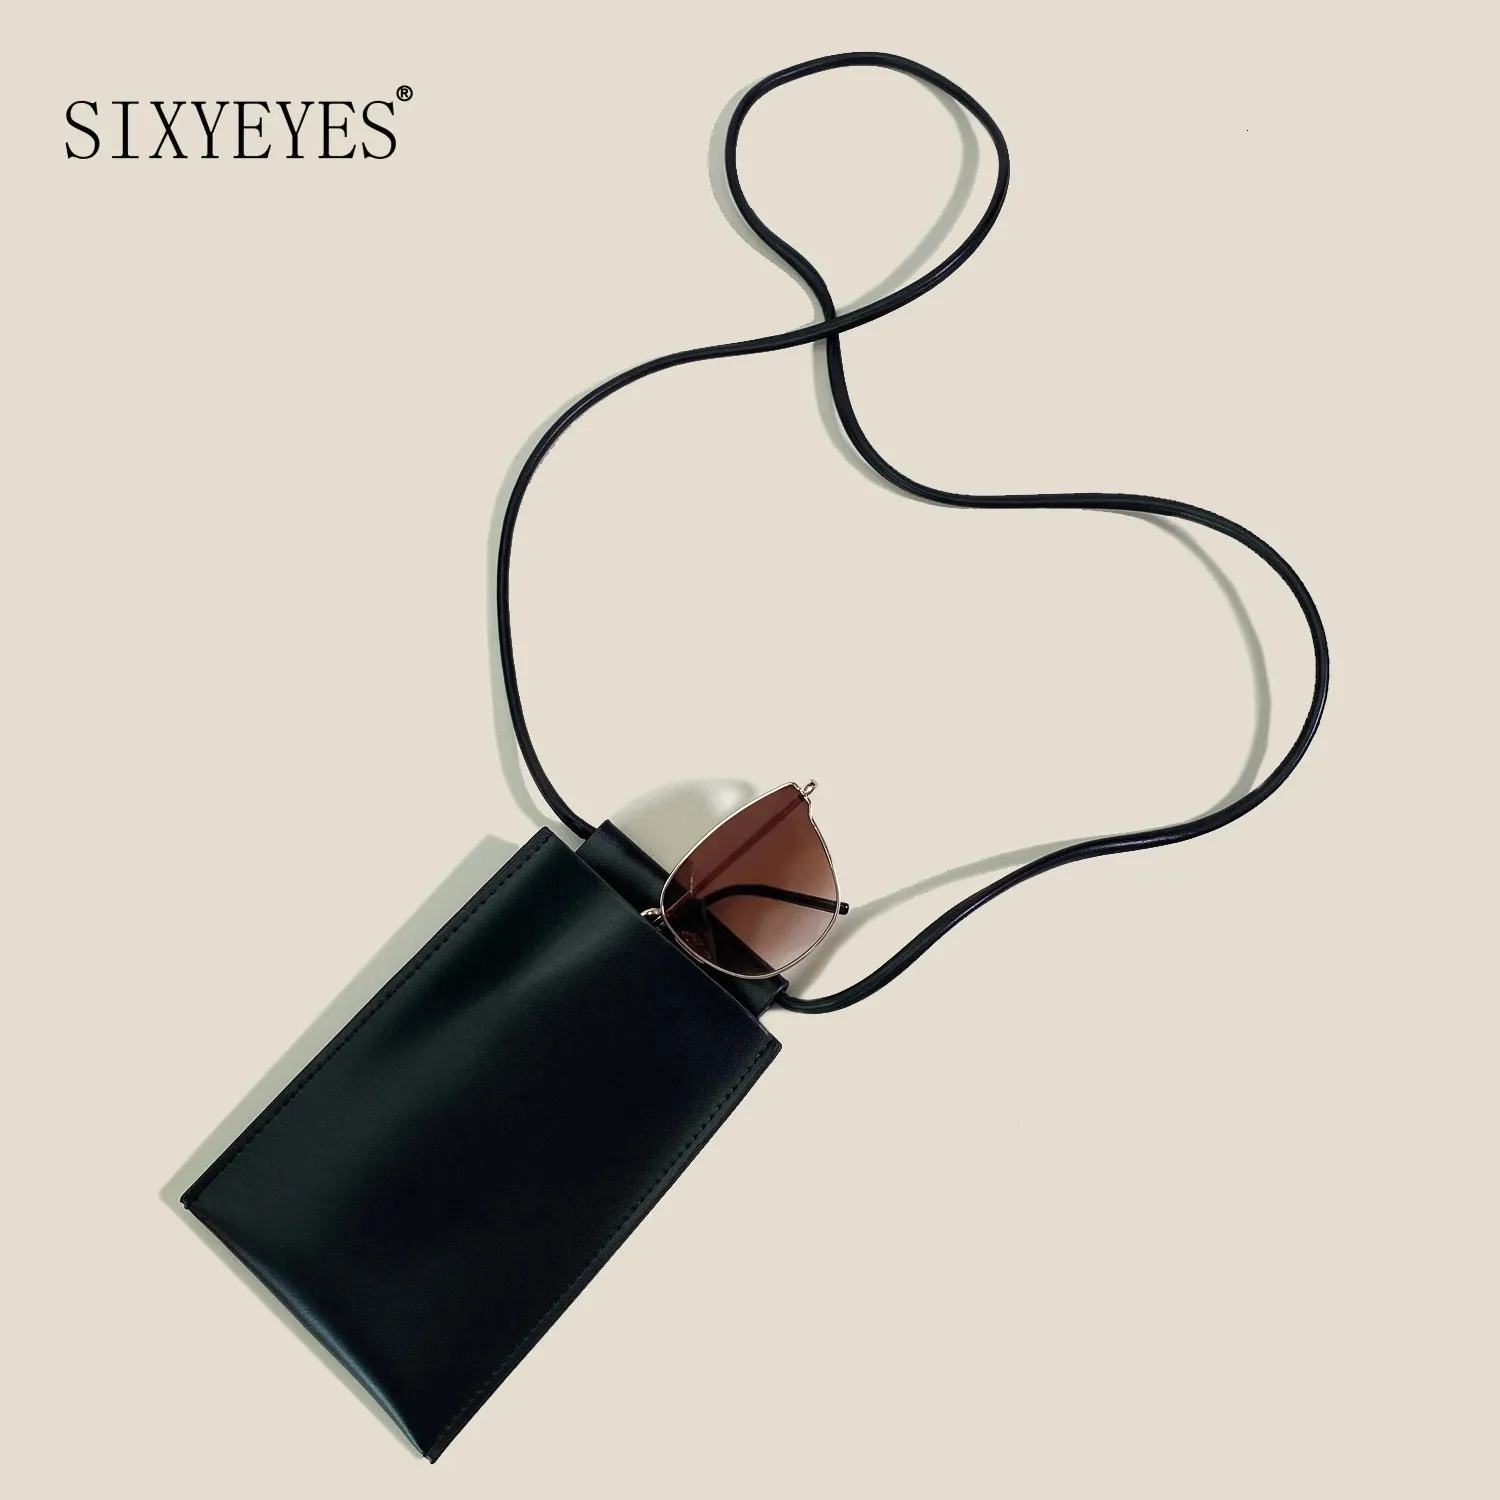 Soft Leather Glasses Lanyard Hanging Neck Clip Bag Man Fashion Portable Eyeglass Case Sunglasses Protection Cover 240106